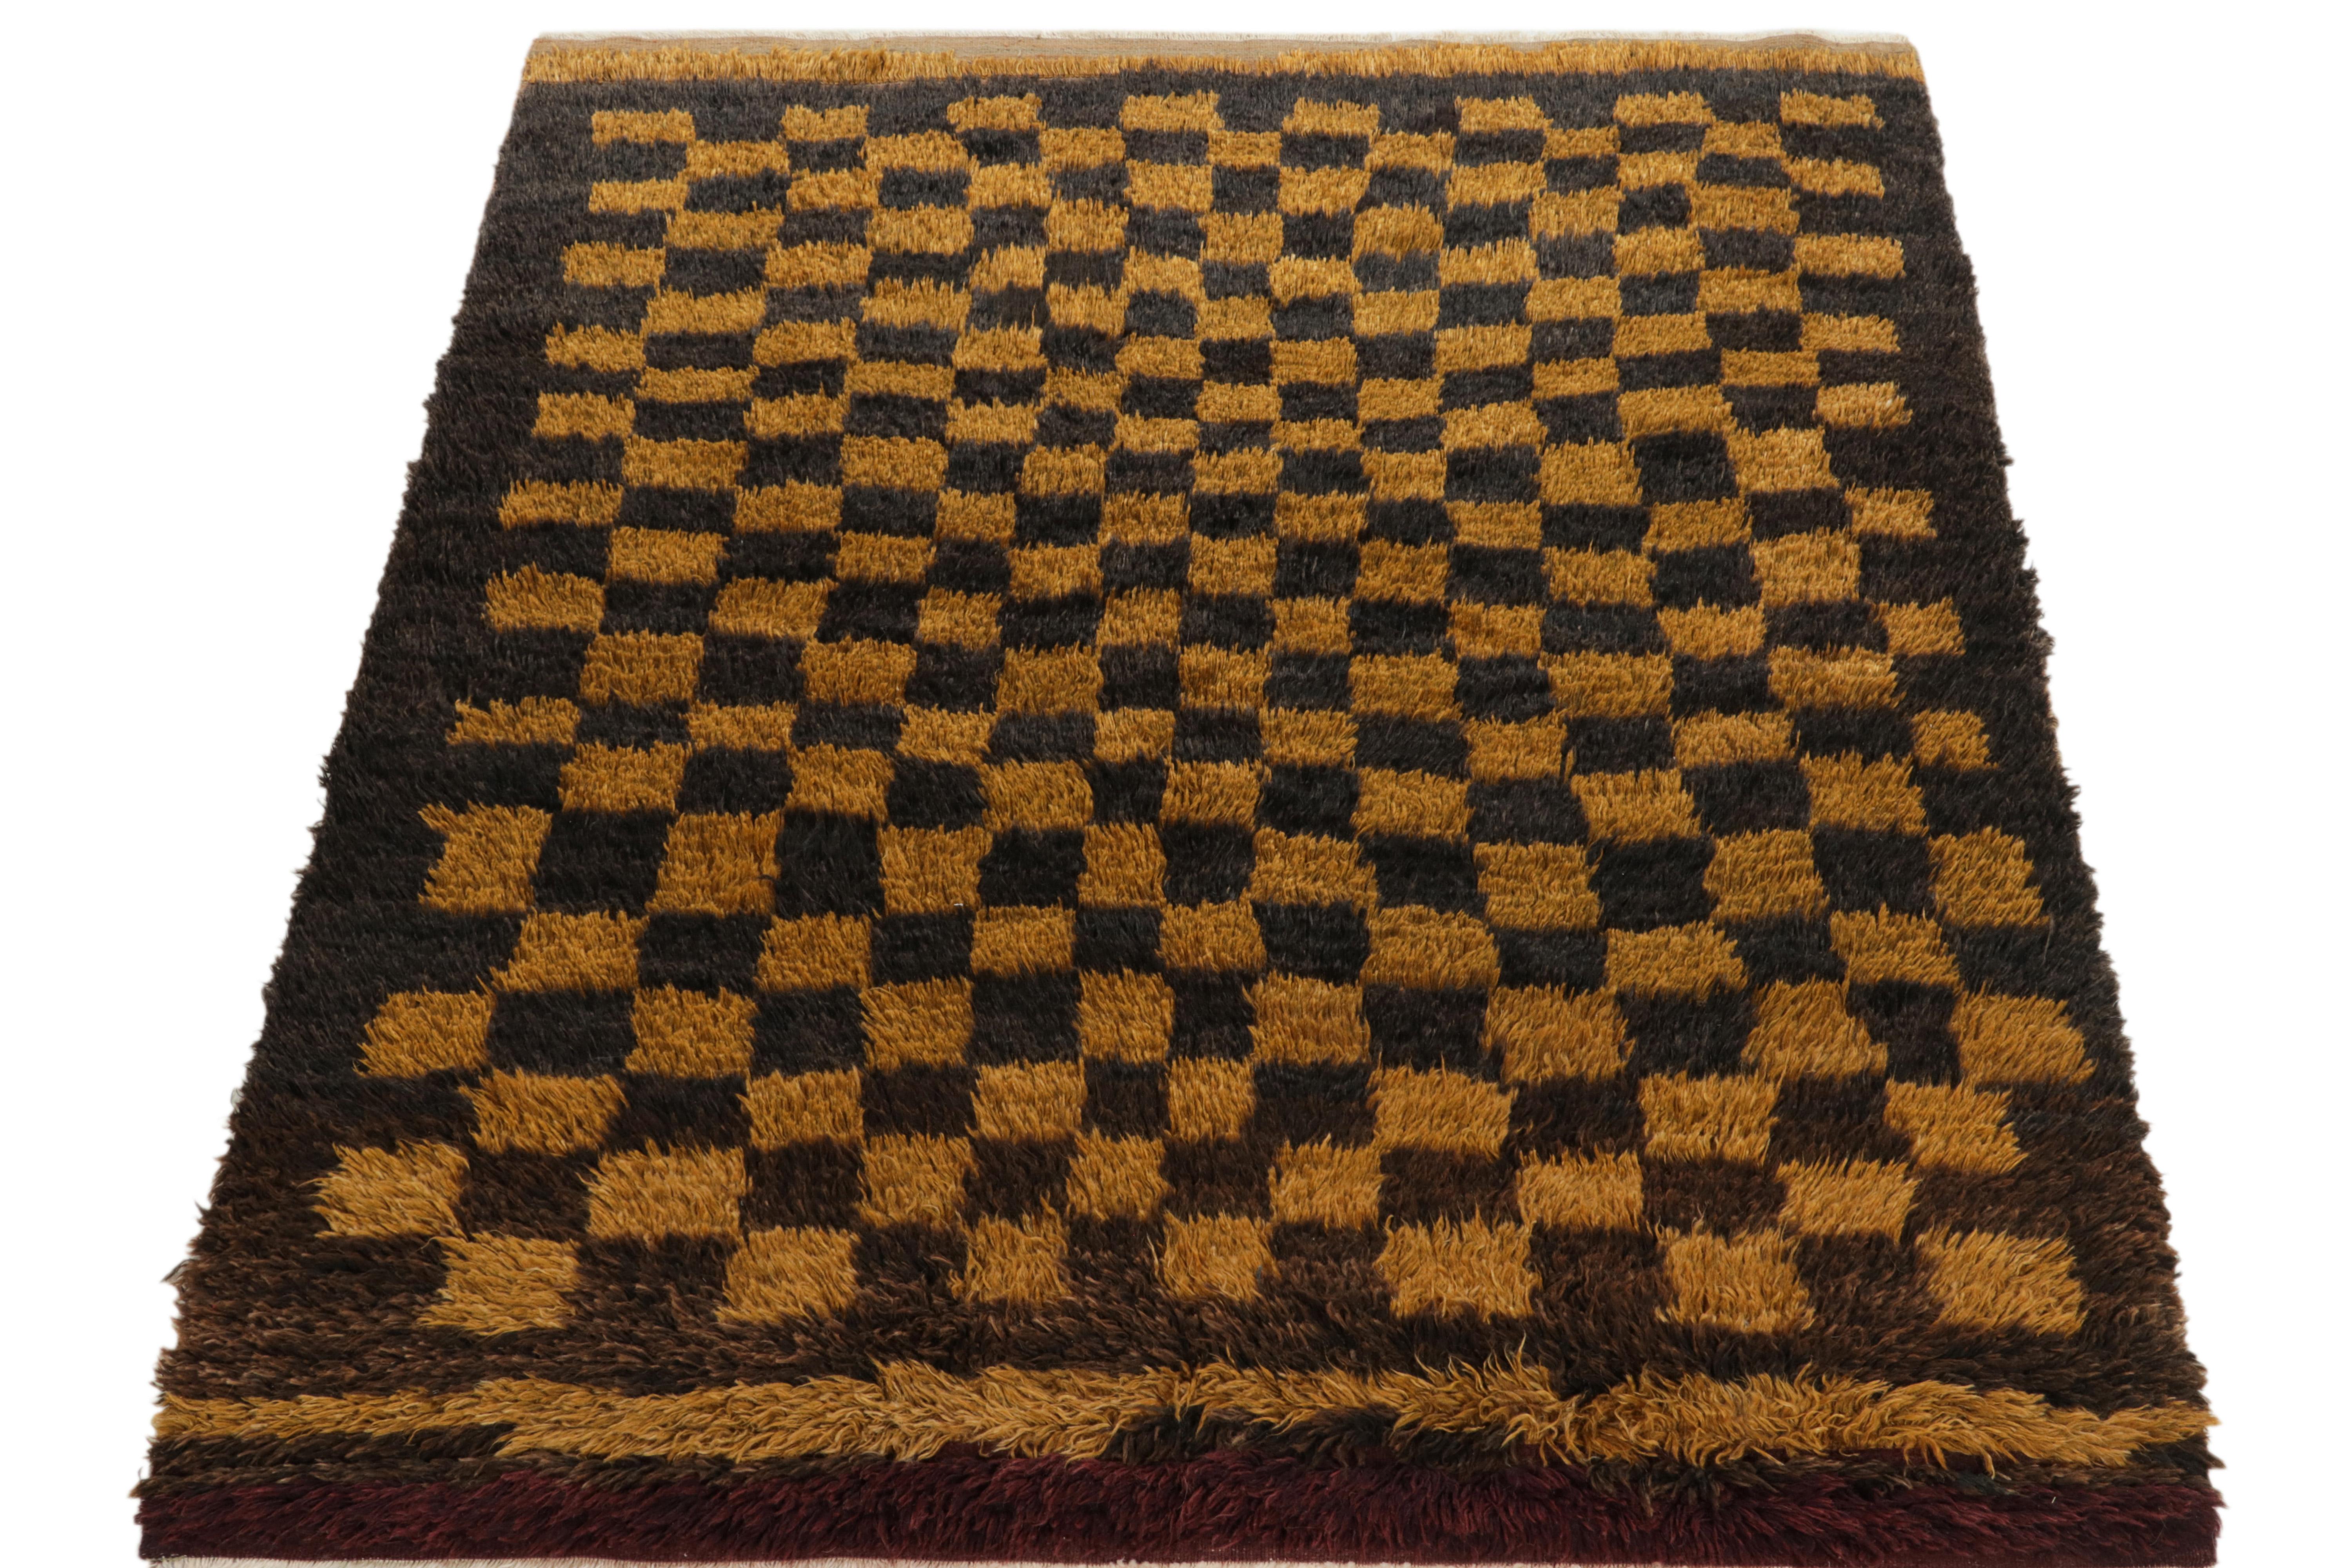 Hand-knotted in wool, a 5x6 vintage Tulu rug originating from Turkey circa 1950-1960, now joining Rug & Kilim’s Antique & Vintage collection. 

On the design: The healthy pile features a well defined checkered pattern in black & gold following